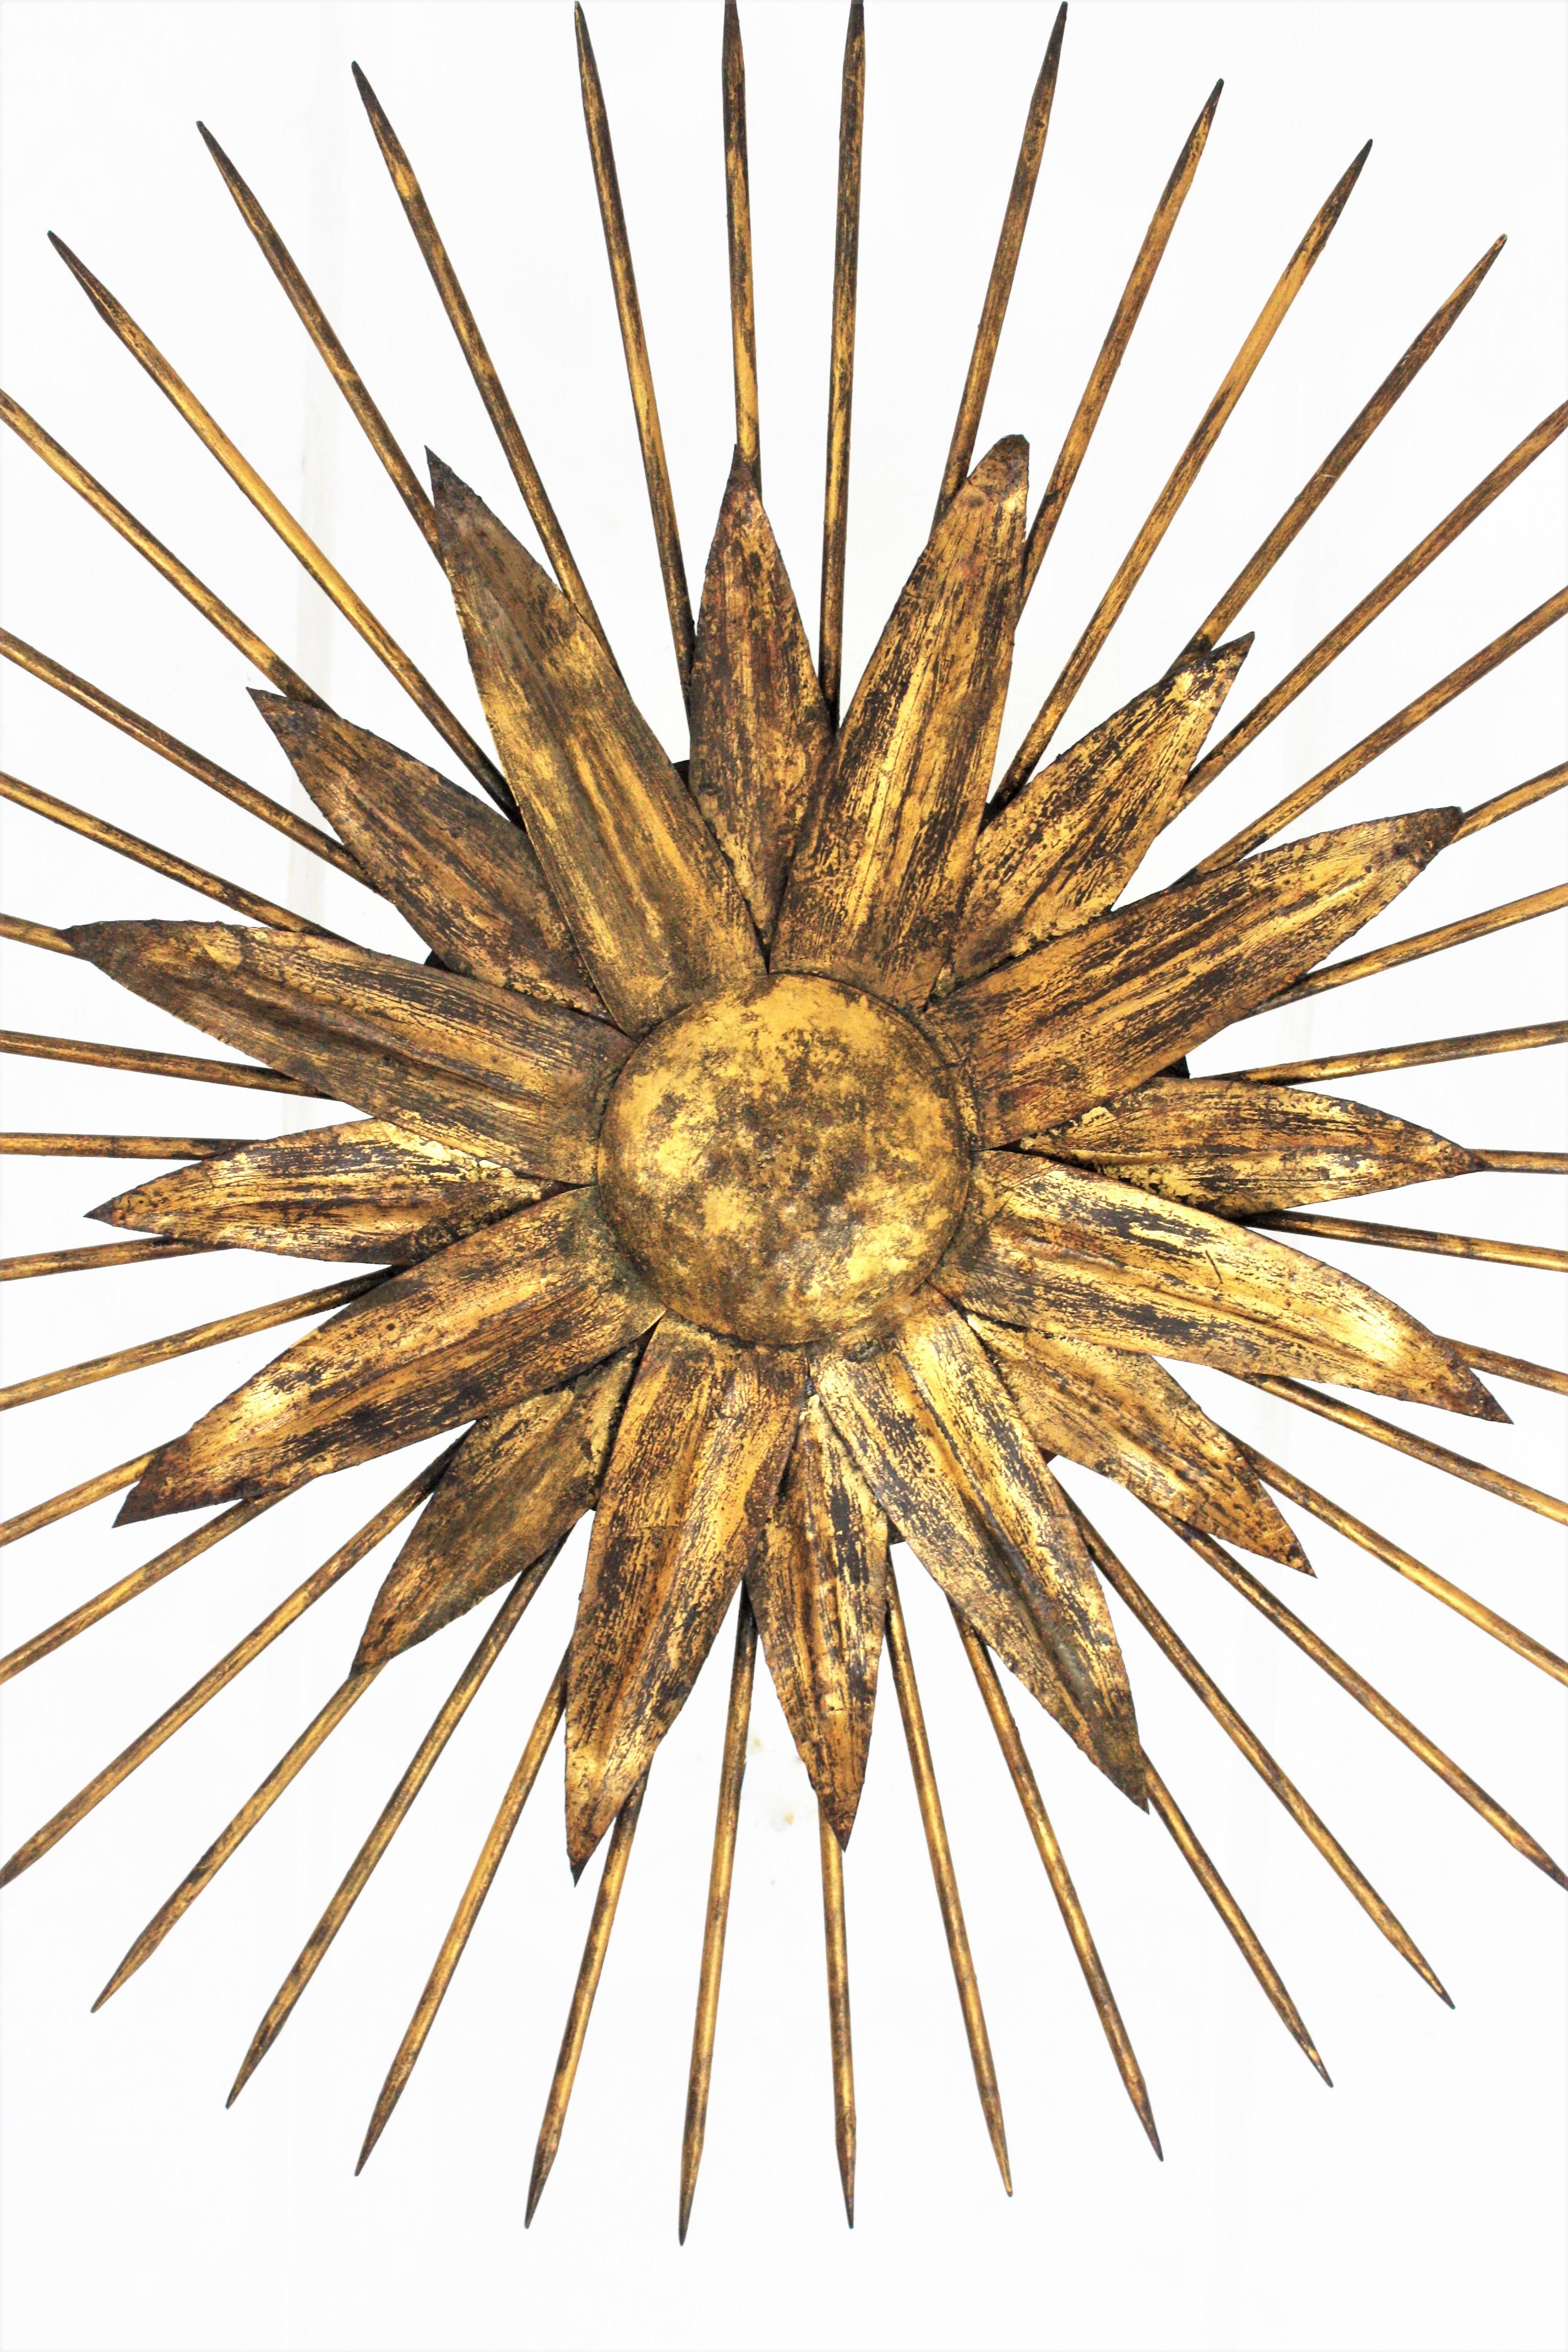 Metal French Sunburst Light Fixture in Gilt Iron with Nail Detail, 1940s For Sale